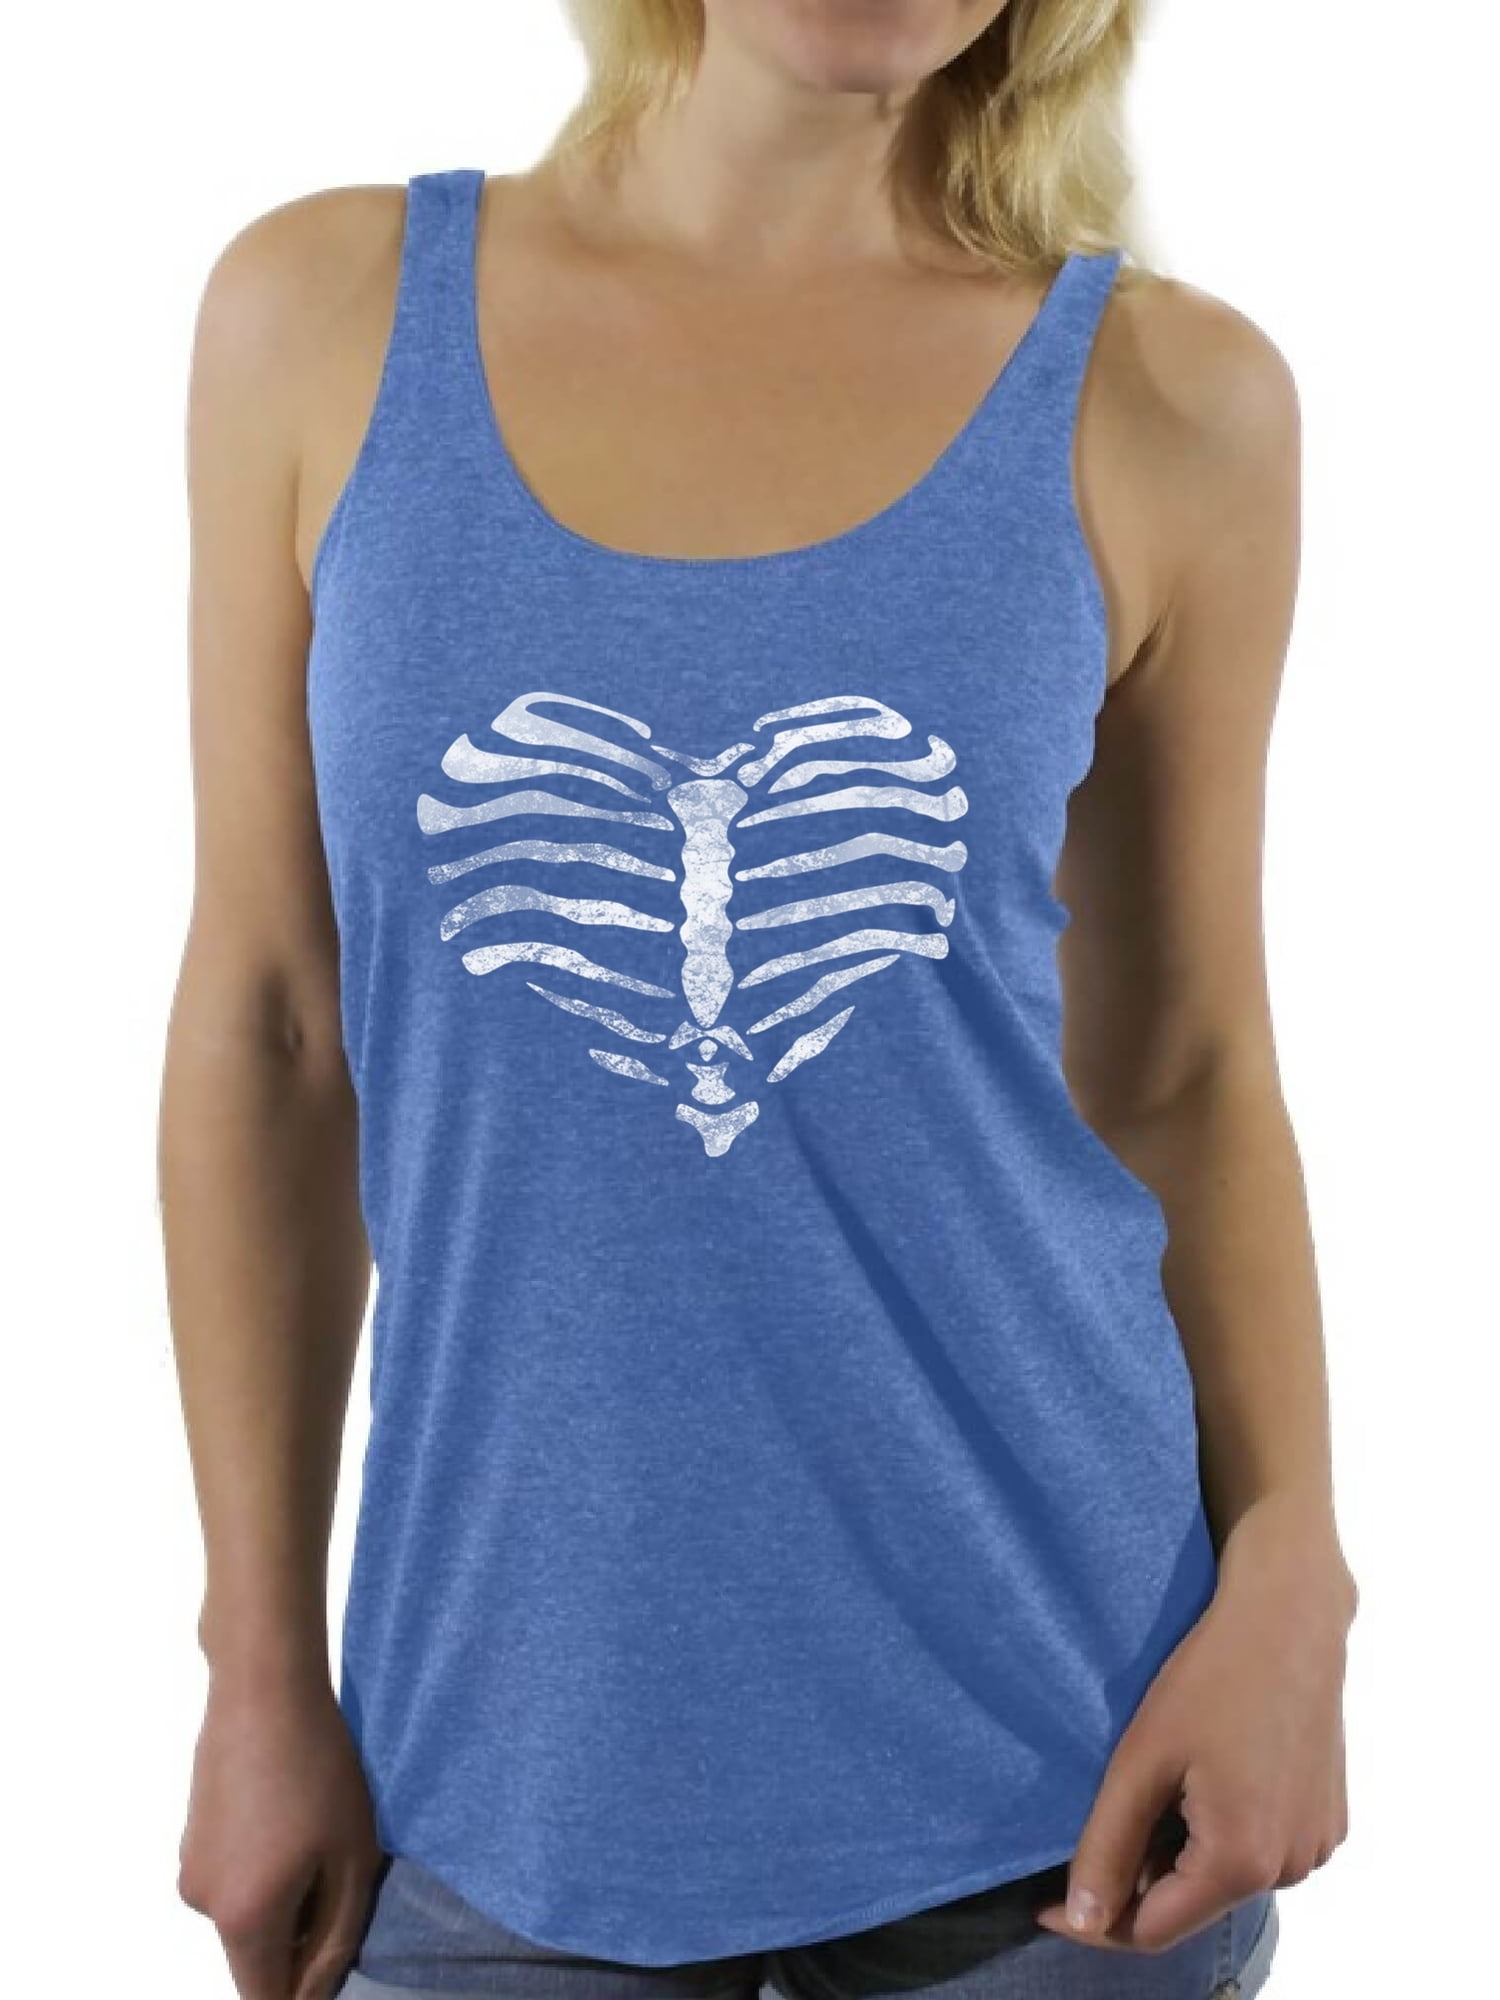 Womens Heart Palm Skeleton Hands Workout Muscle tank tops Vest Sleeveless Top 